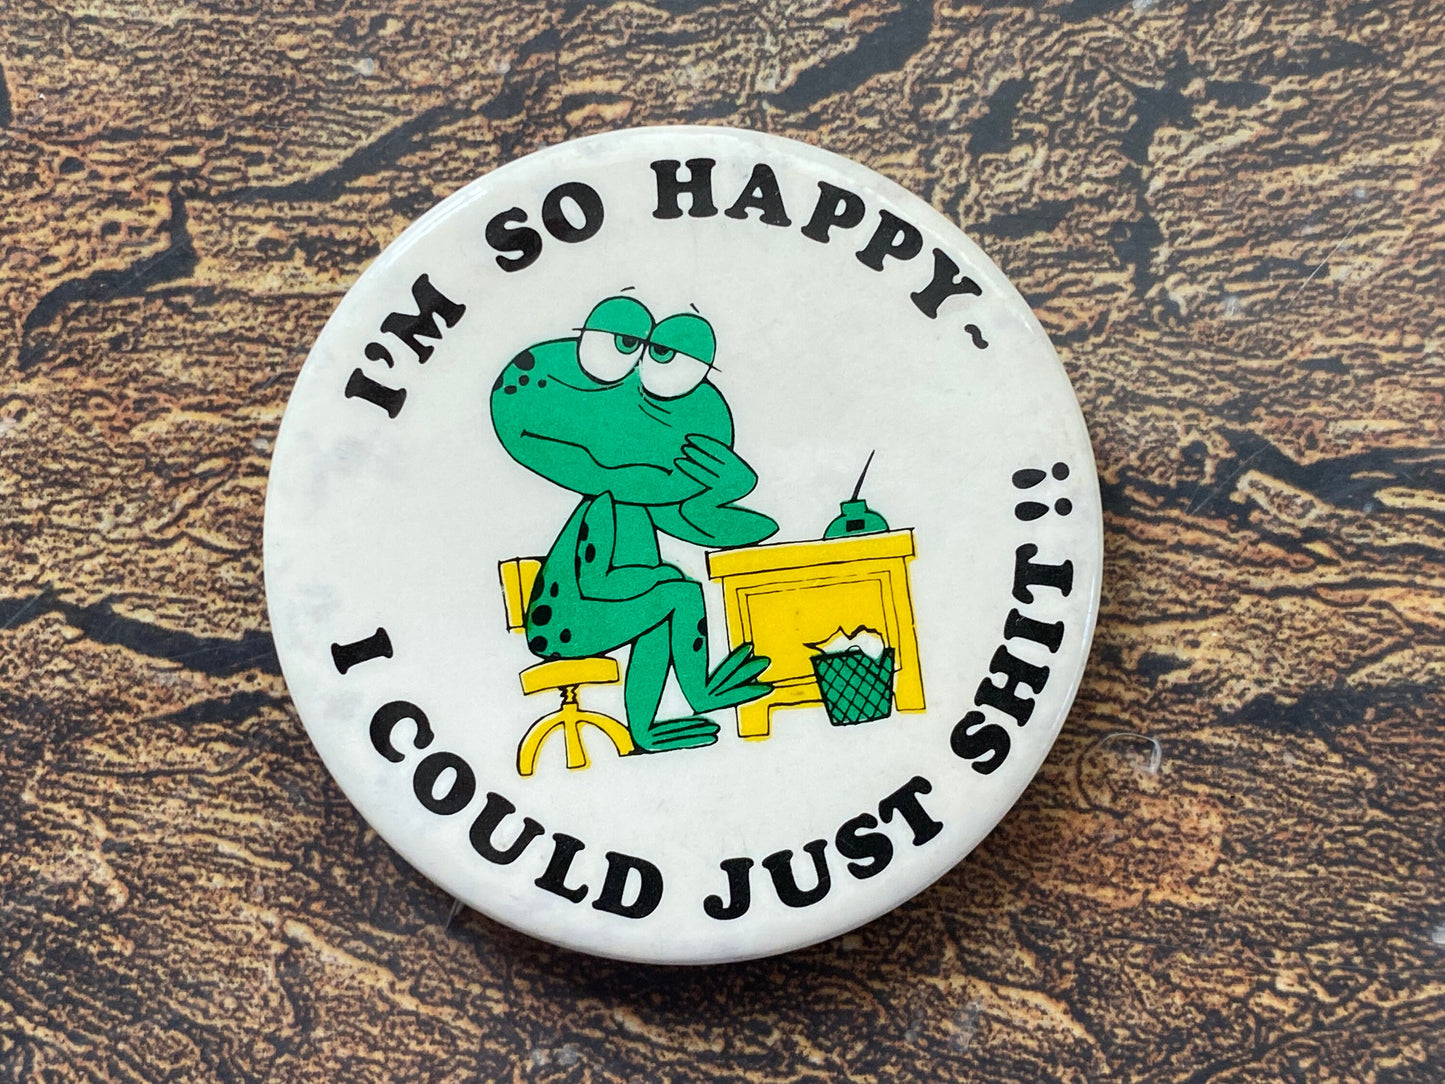 Vintage I'm So Happy I Could Just Shit!! pinback button. Retro funny snarky pins. Sarcastic frog button. MATURE